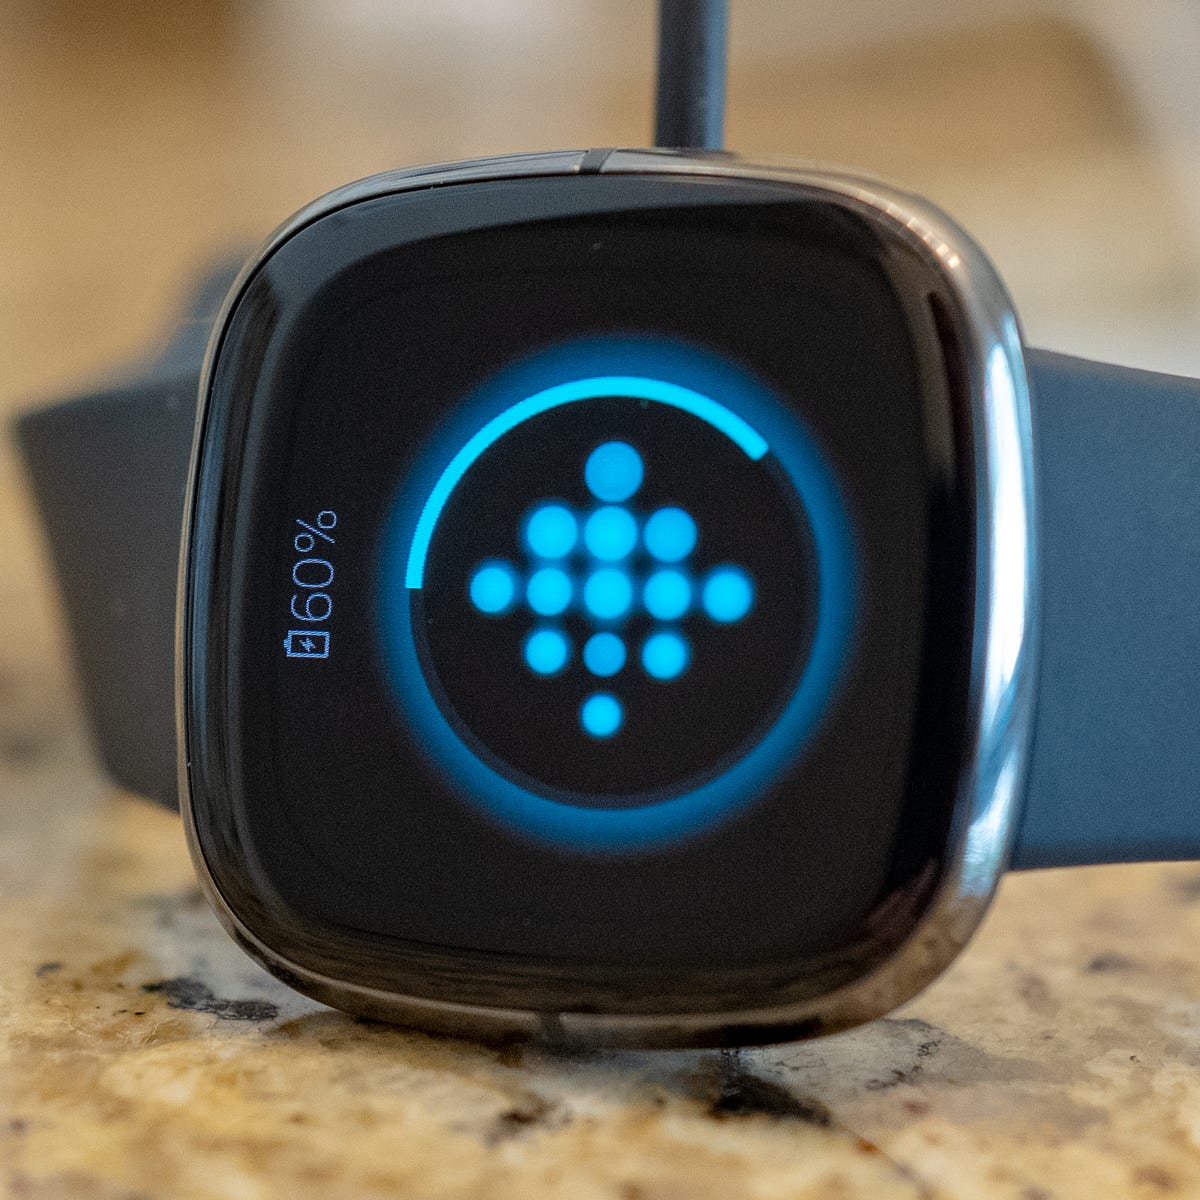 transfer data from fitbit to apple watch